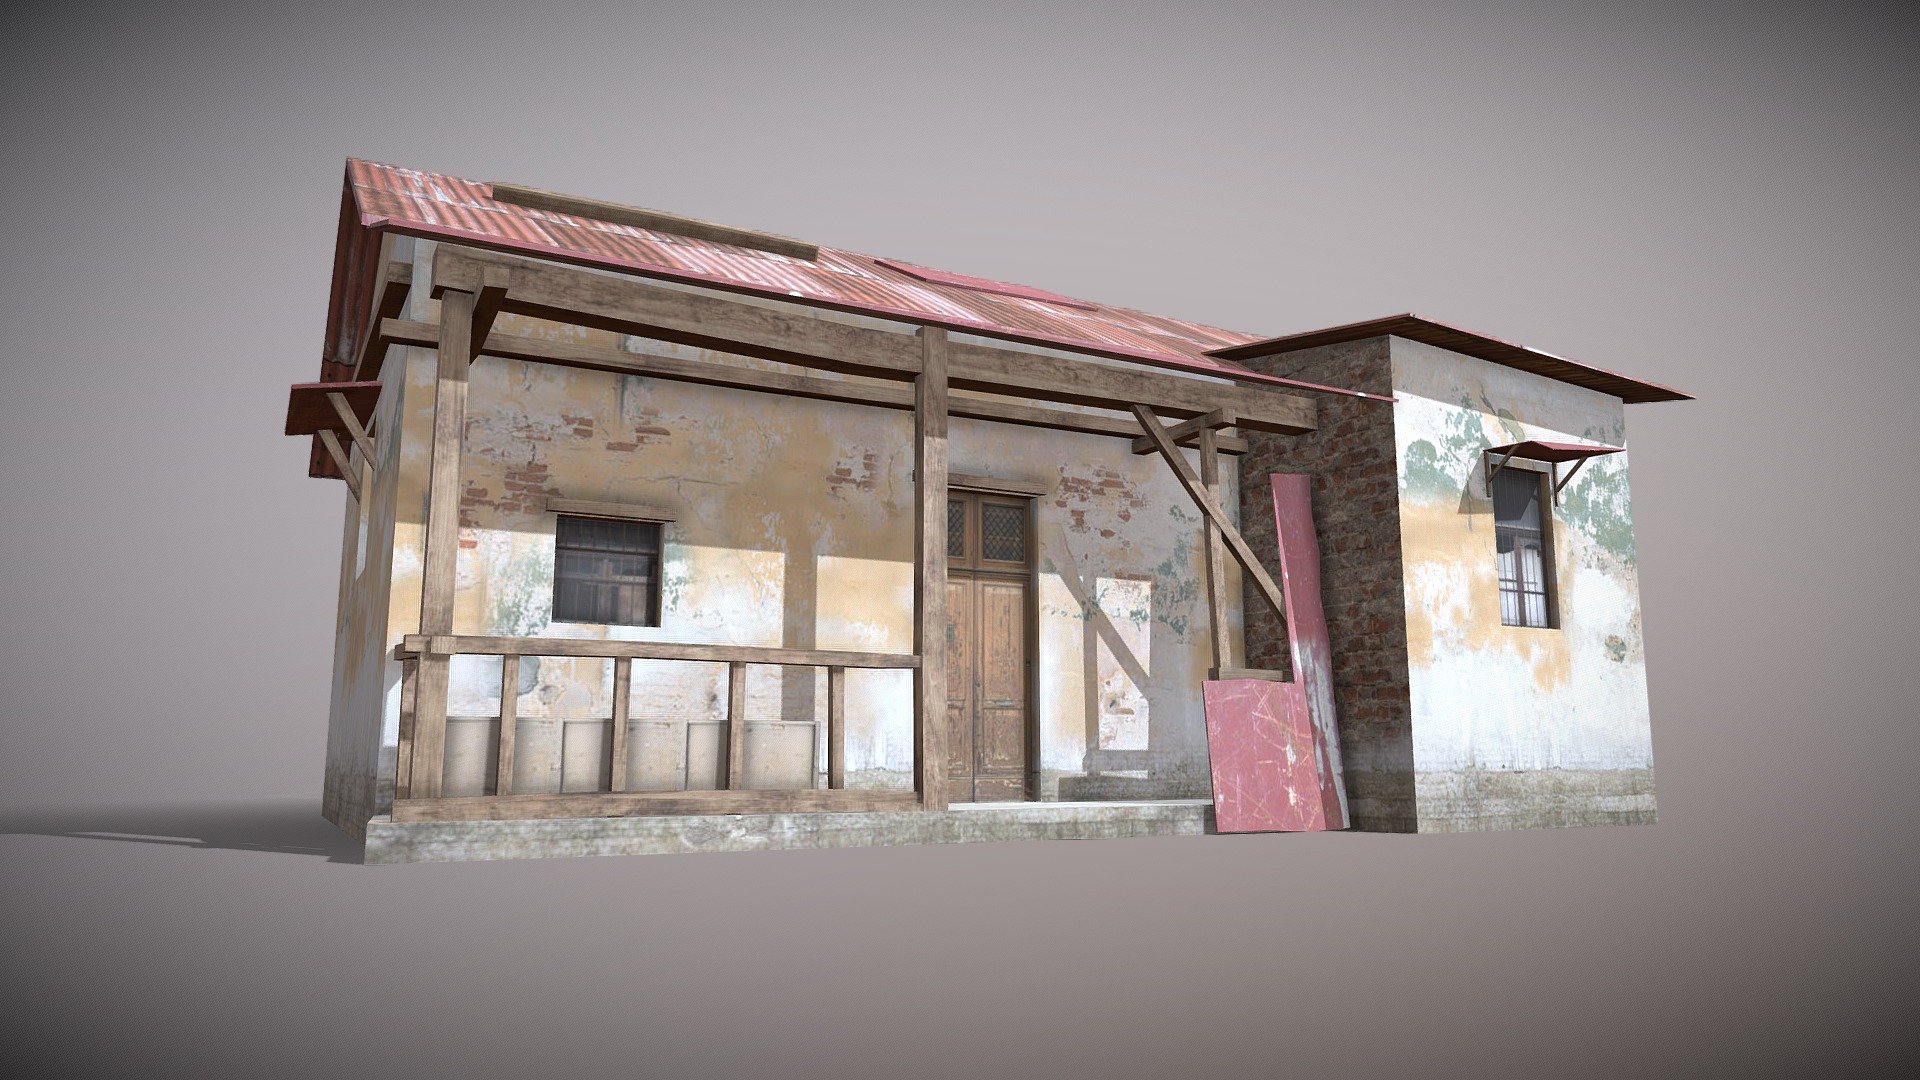 Game Ready 3D Old House /slum Native file format 3Ds max 2022 Other formats Blender 4.0 ,FBX, OBJ, All formats include materials &amp; textures

Polygons- 556 Vertices - 639

Materials &amp; textures. 1 Diffuse Map 2048x2048 - Slum X4 - Buy Royalty Free 3D model by 3DRK (@3DRK98) 3d model